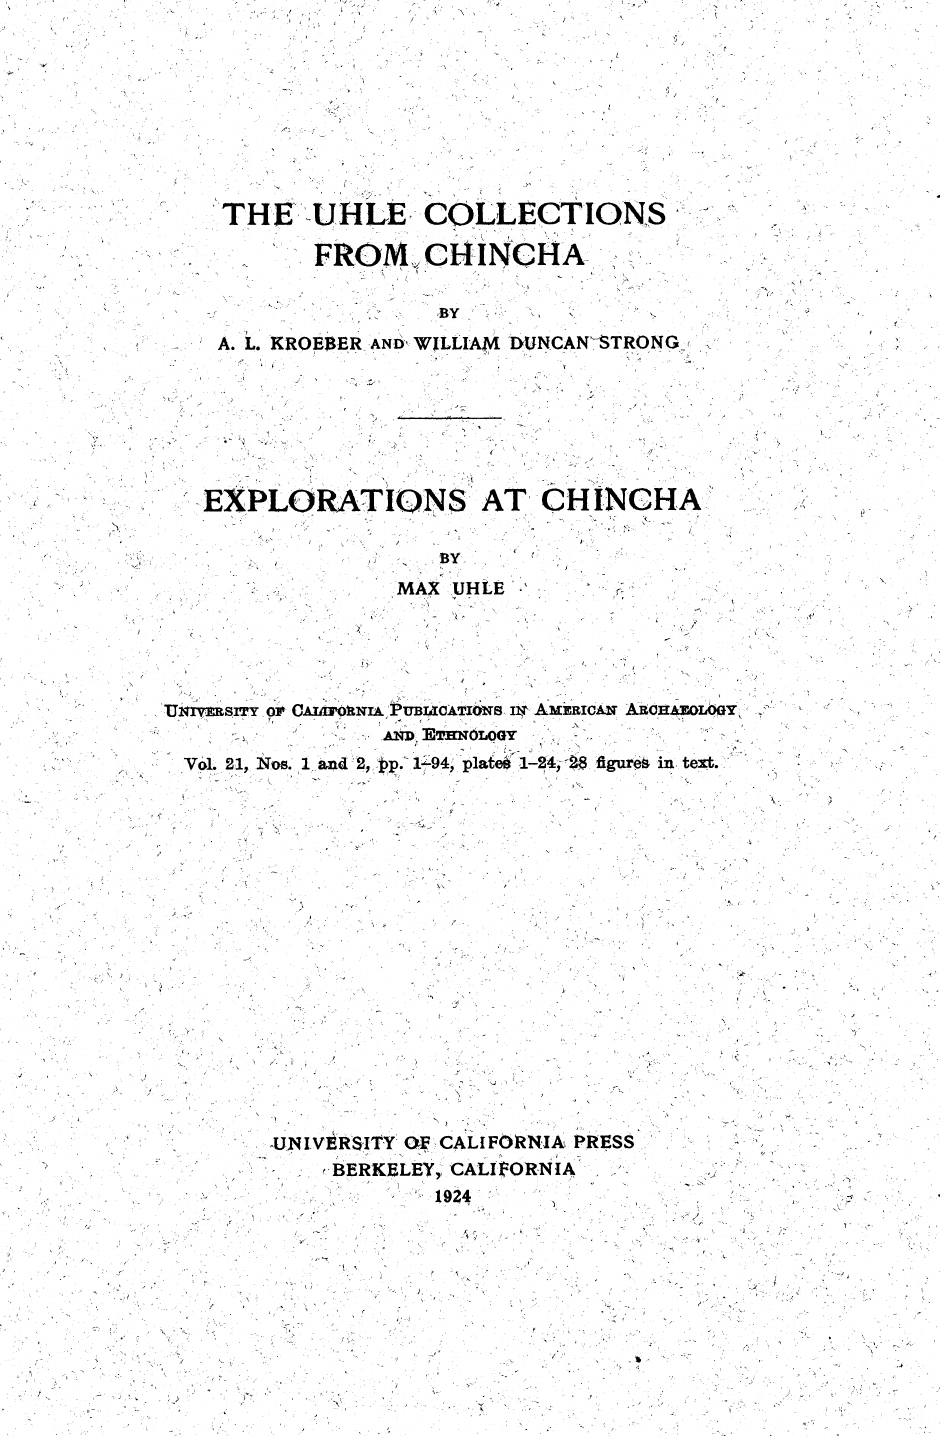 The Uhle collections from Chincha. Explorations at Chincha. University of California Publications in American Archaeology and Ethnology Vol. 21, Nos. 1 and 2, pp. 1-94, plates 1-24, 28 figures in text. e